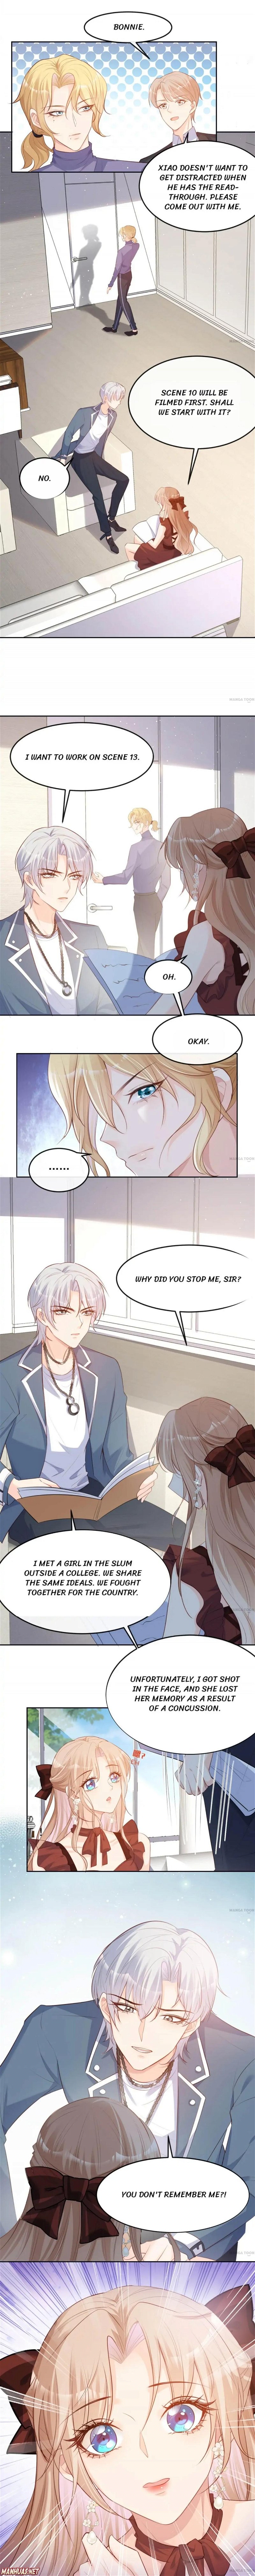 CEO’s Wife on Trending Topic Again Chapter 37 - Page 3